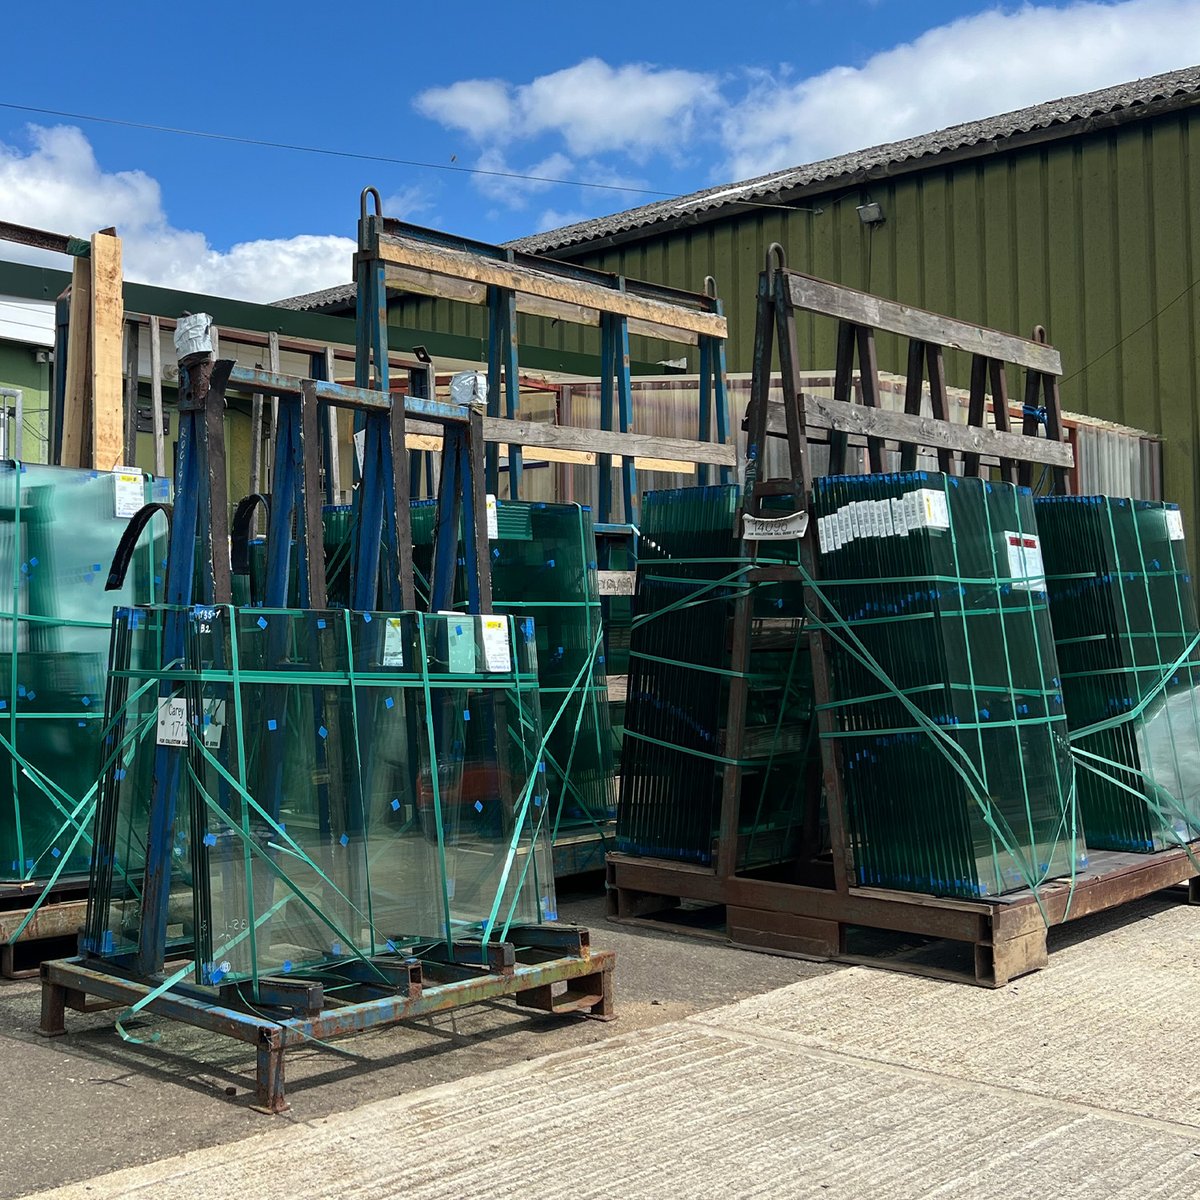 We’ve been hard at work manufacturing and preparing glass and balcony frames for 50 balconies, set to be installed in Aylesbury! #metalwork #fabrication #manufacturing #madeinbritain #kentbusiness #balconies #madeinkent